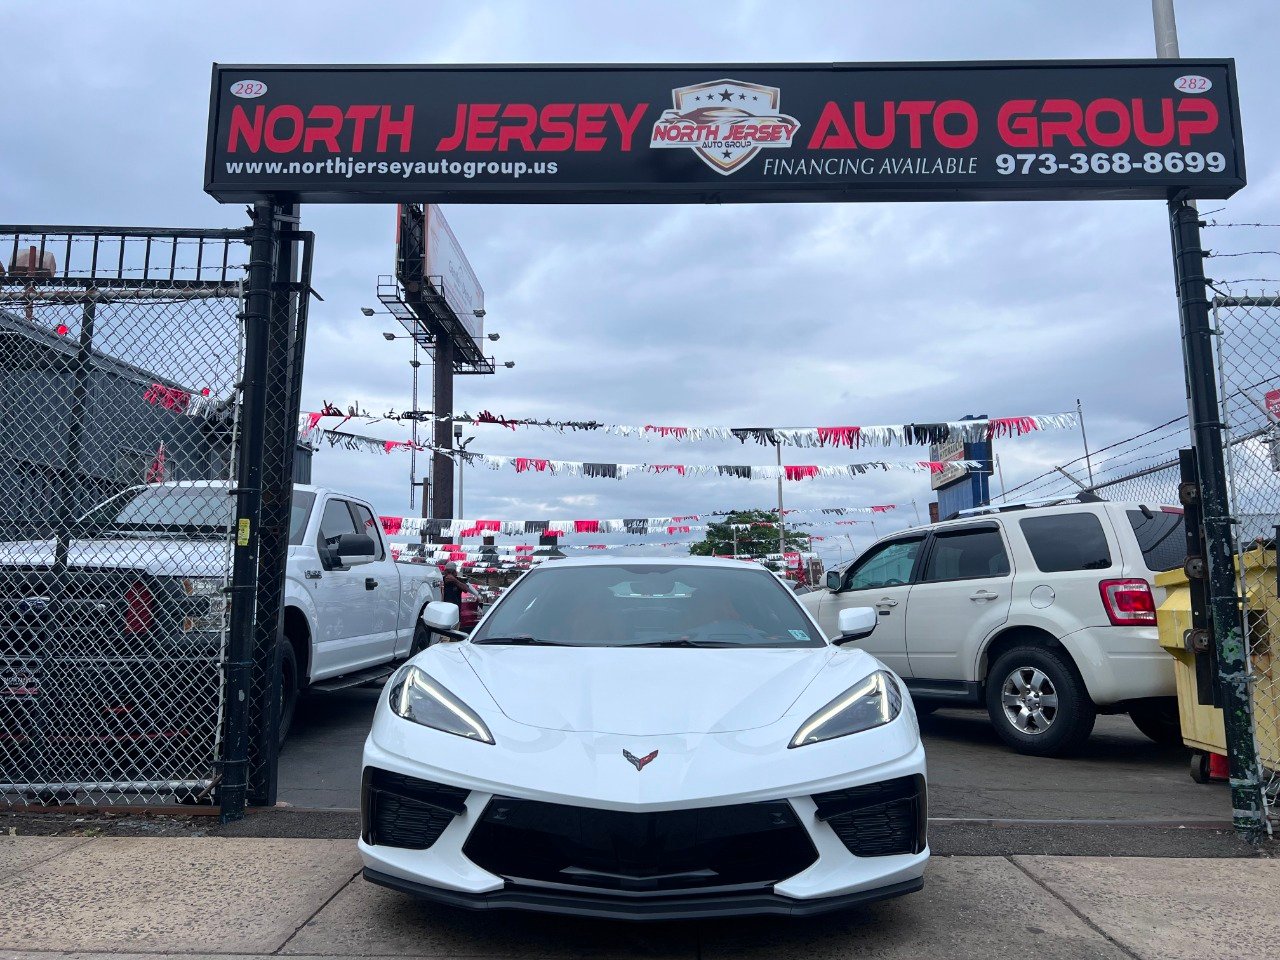 North Jersey Auto Group Inc.